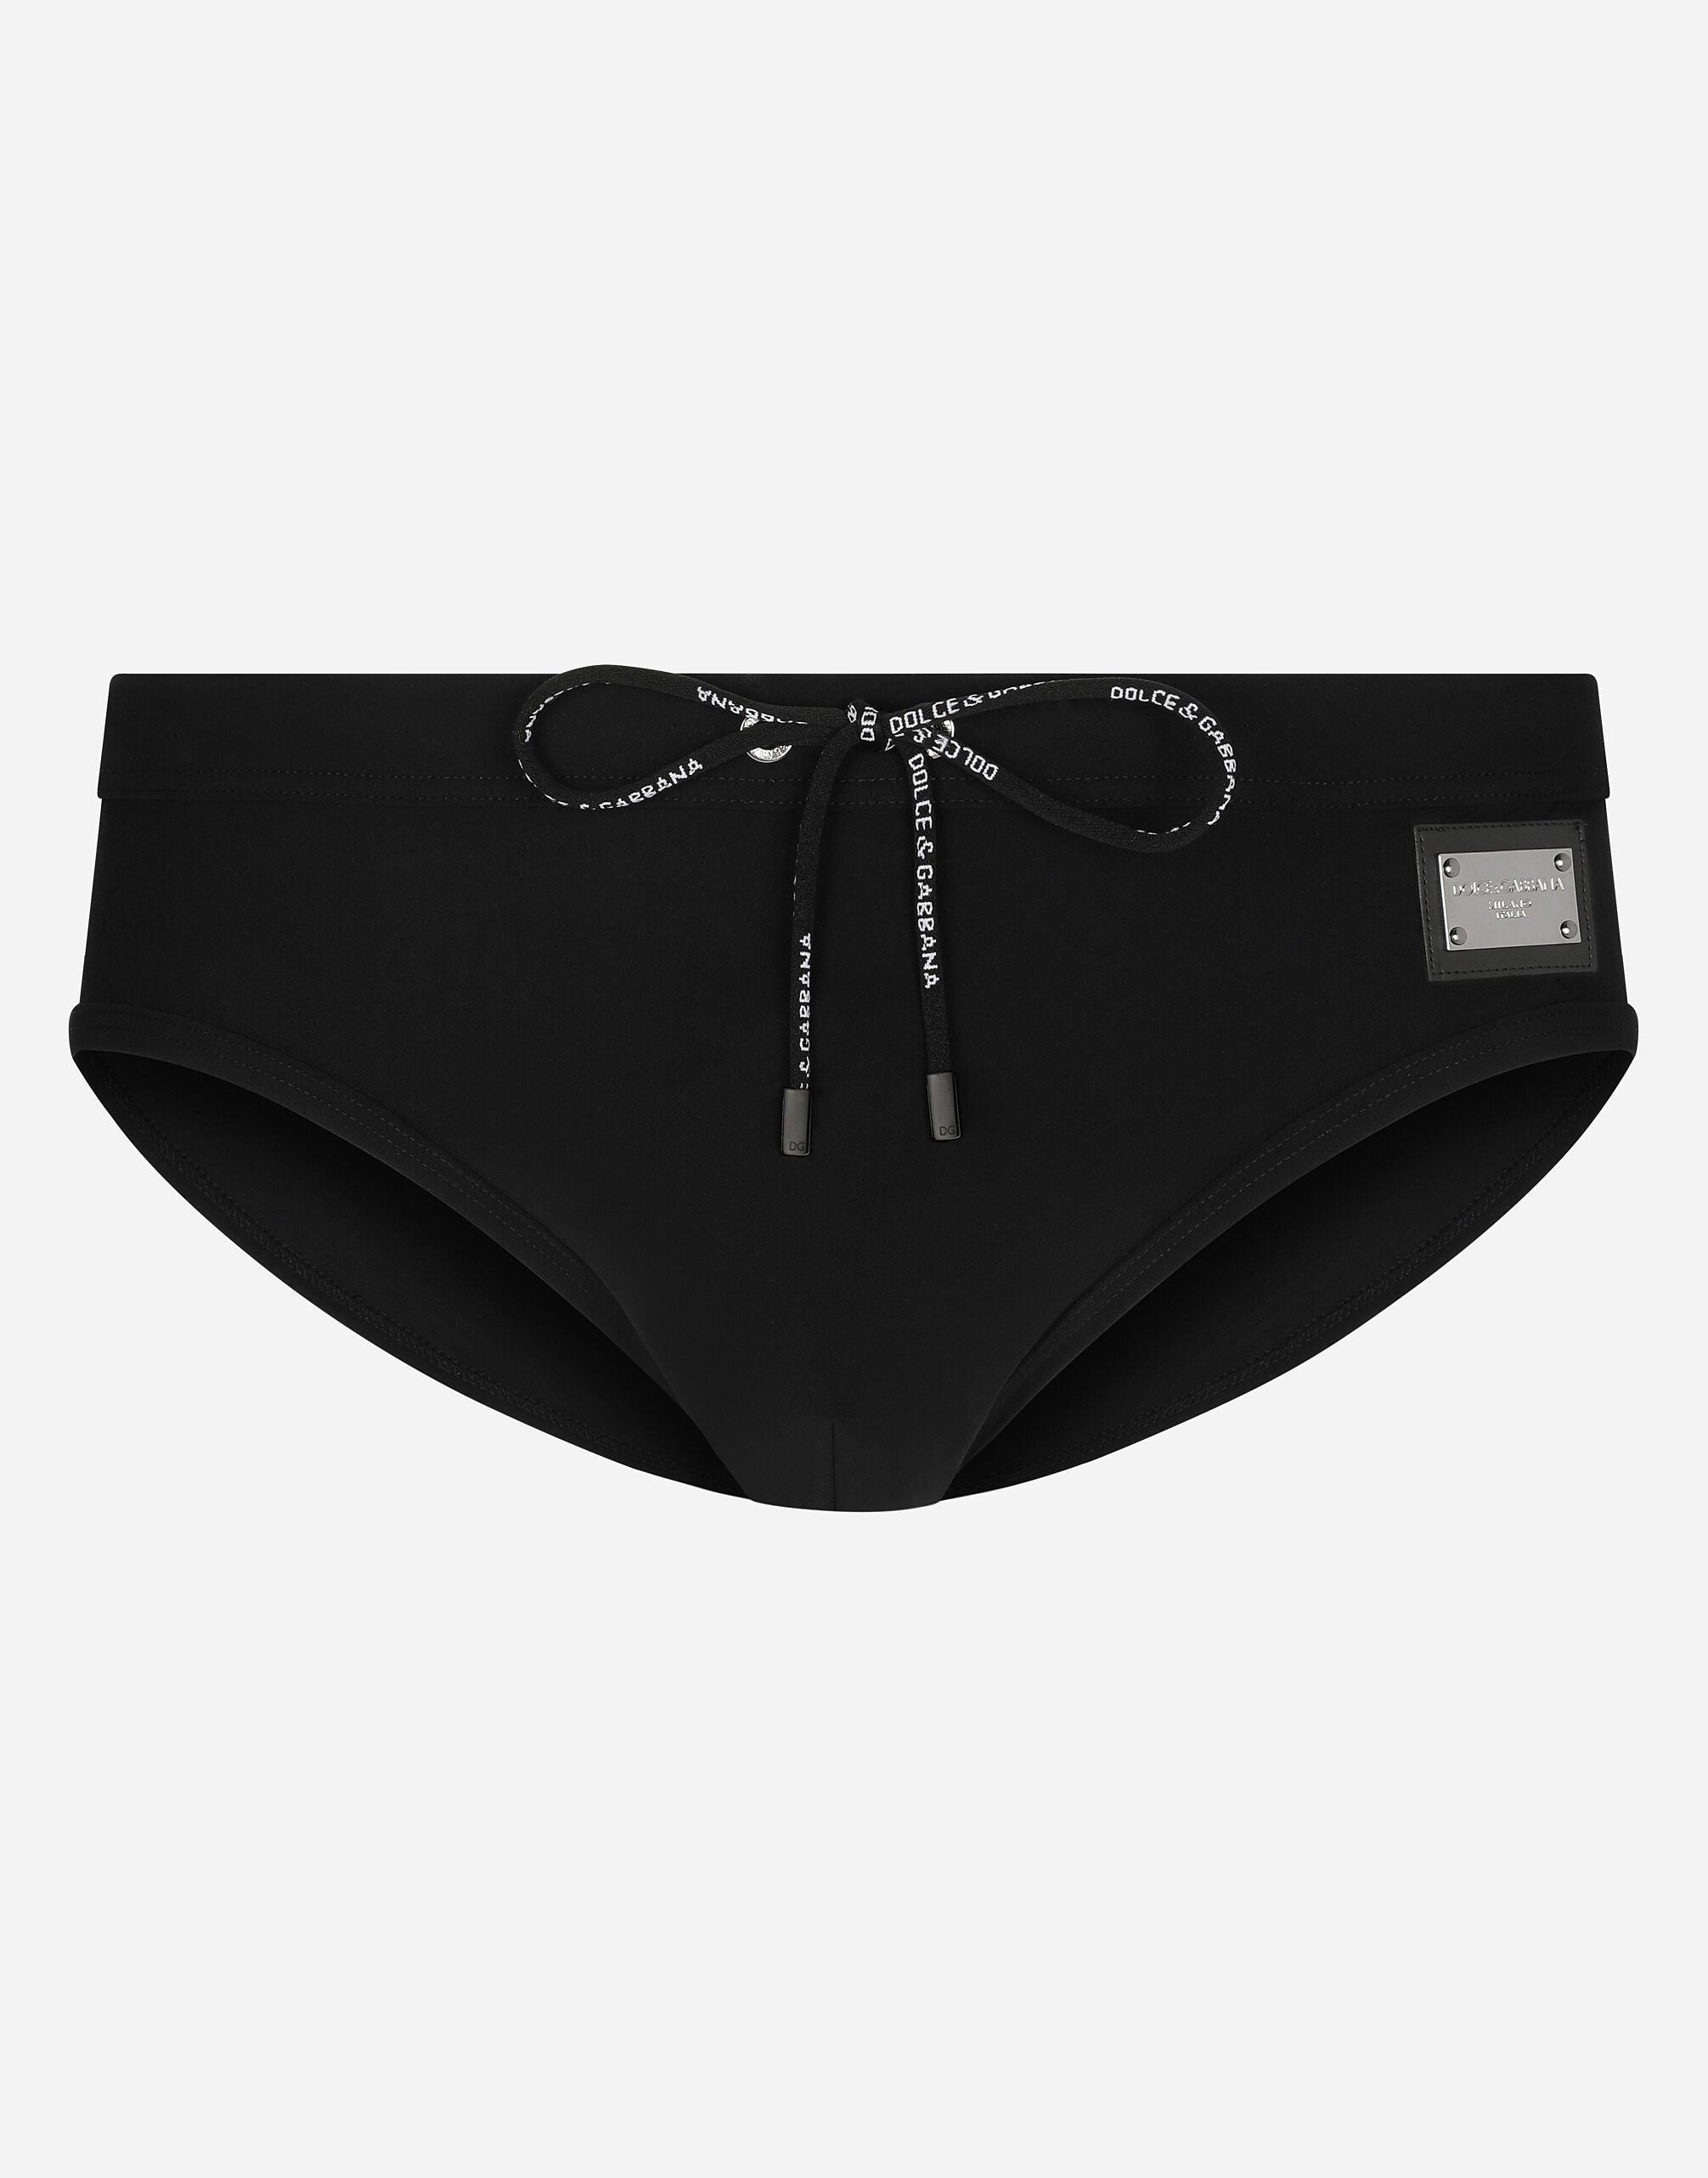 Dolce & Gabbana Swim briefs with high-cut leg and branded tag Print M4A13TISMHF